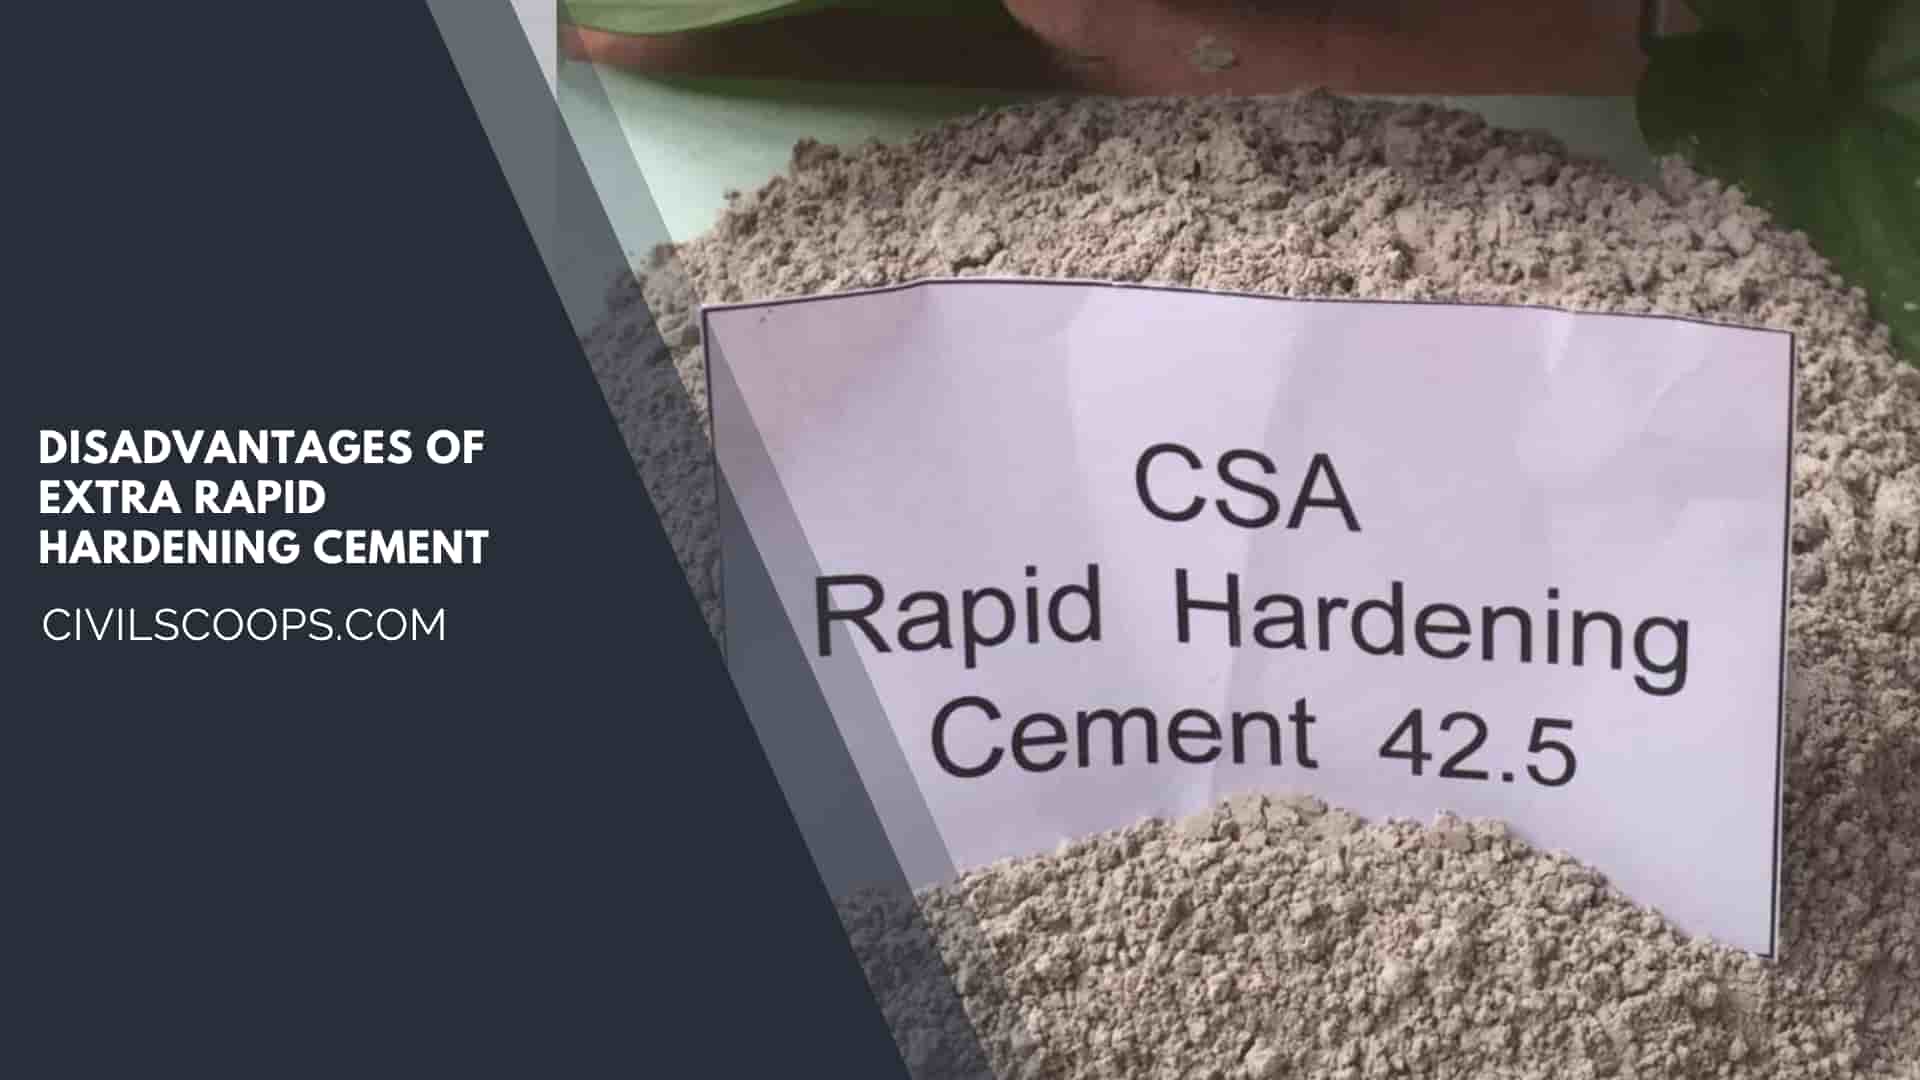 Disadvantages of Extra Rapid Hardening Cement